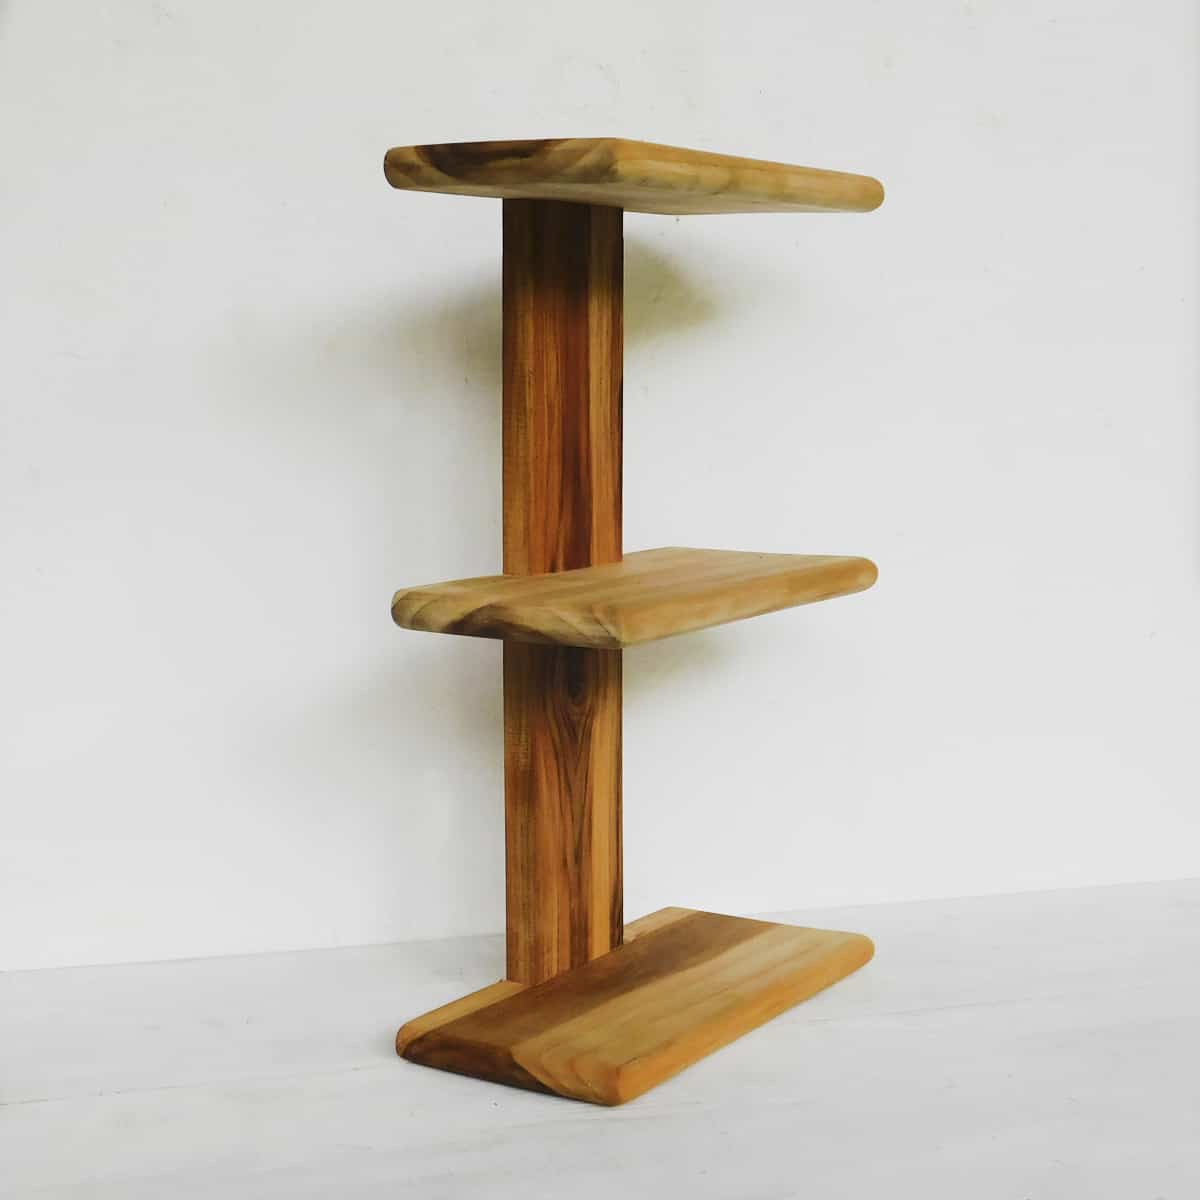 handmade teak shelves with three tiers seen from the side. handmade in guatemala.